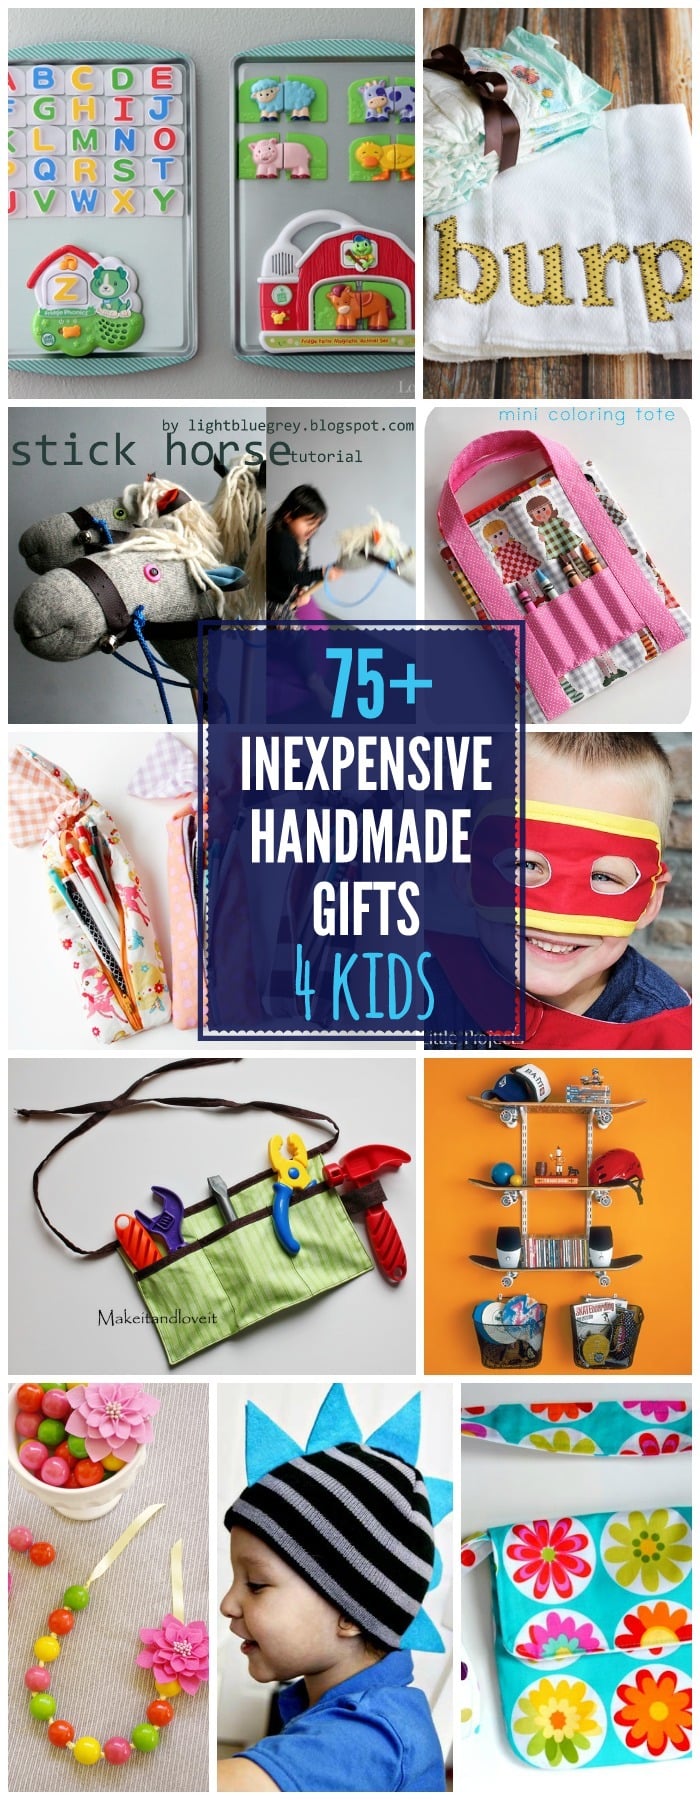 75+ INEXPENSIVE Handmade Gifts for Kids - so many great tutorials for great gift ideas! { lilluna.com }